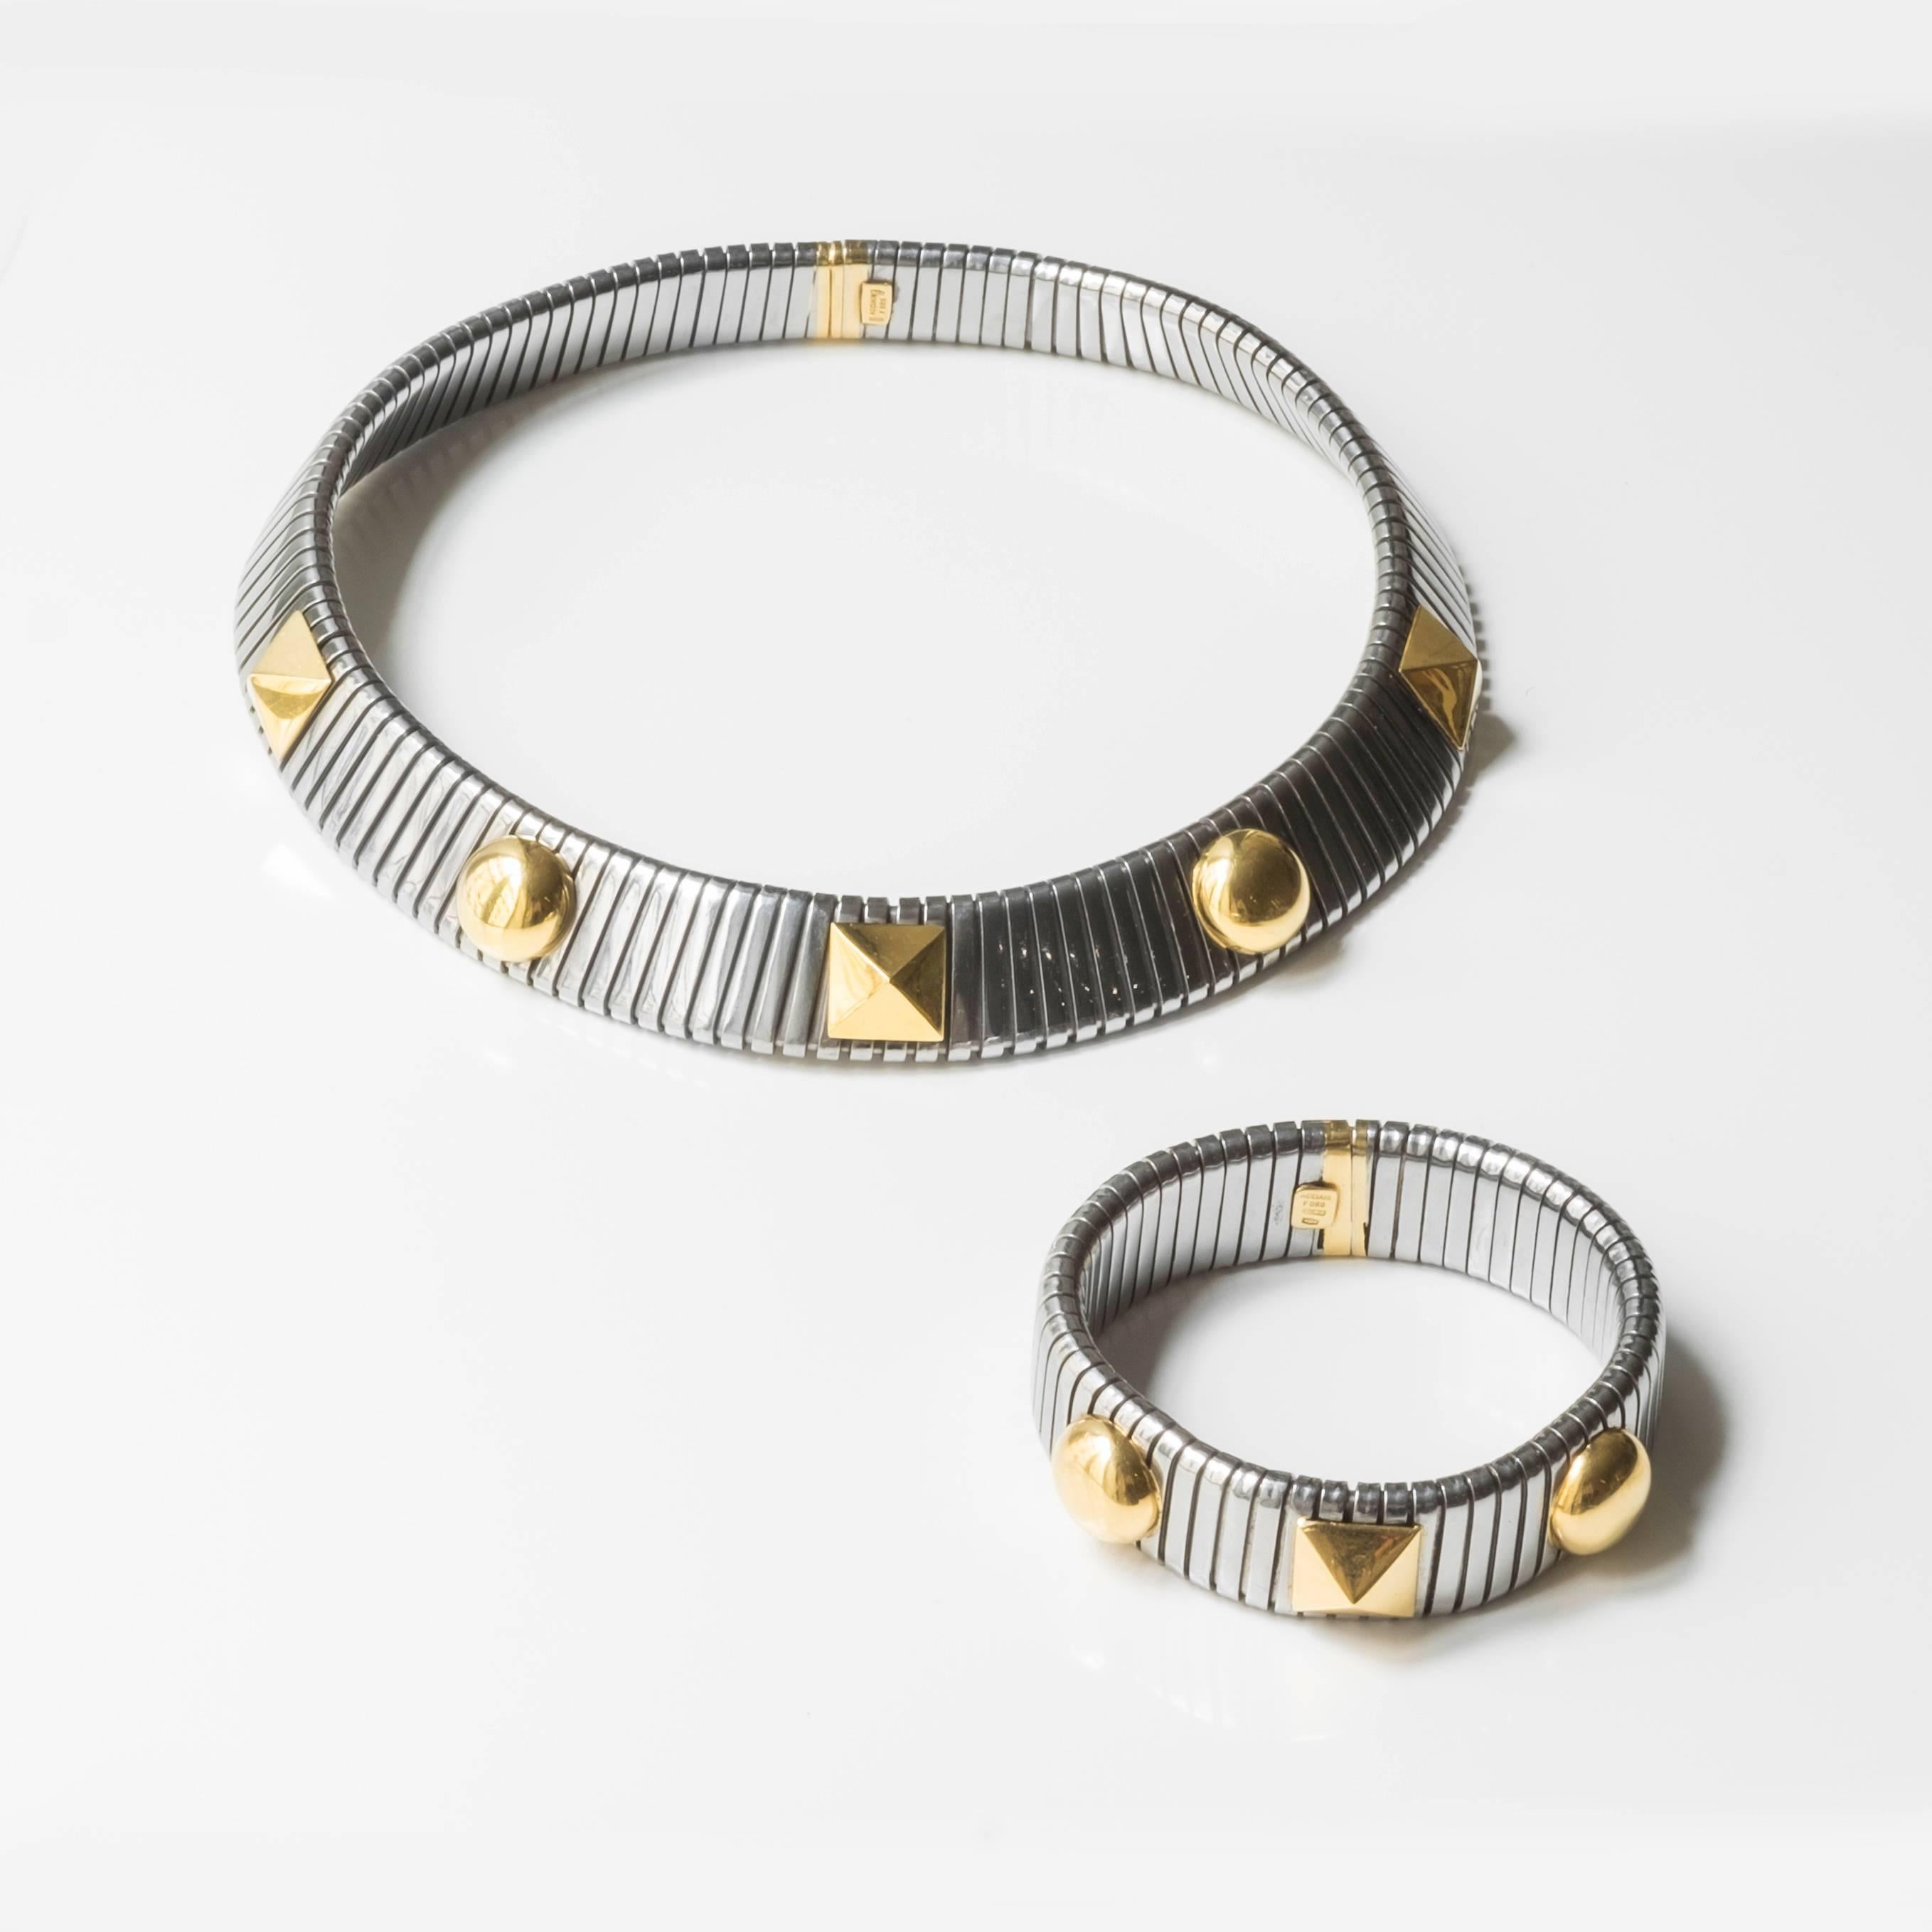 Dashing tubogas Italian-made set, comprising of a collar necklace and bracelet, ofsteel and gold. The set is fashioned with geometric elements: triangular and circular three-dimensional shapes alternately occupy the surface of the necklace and